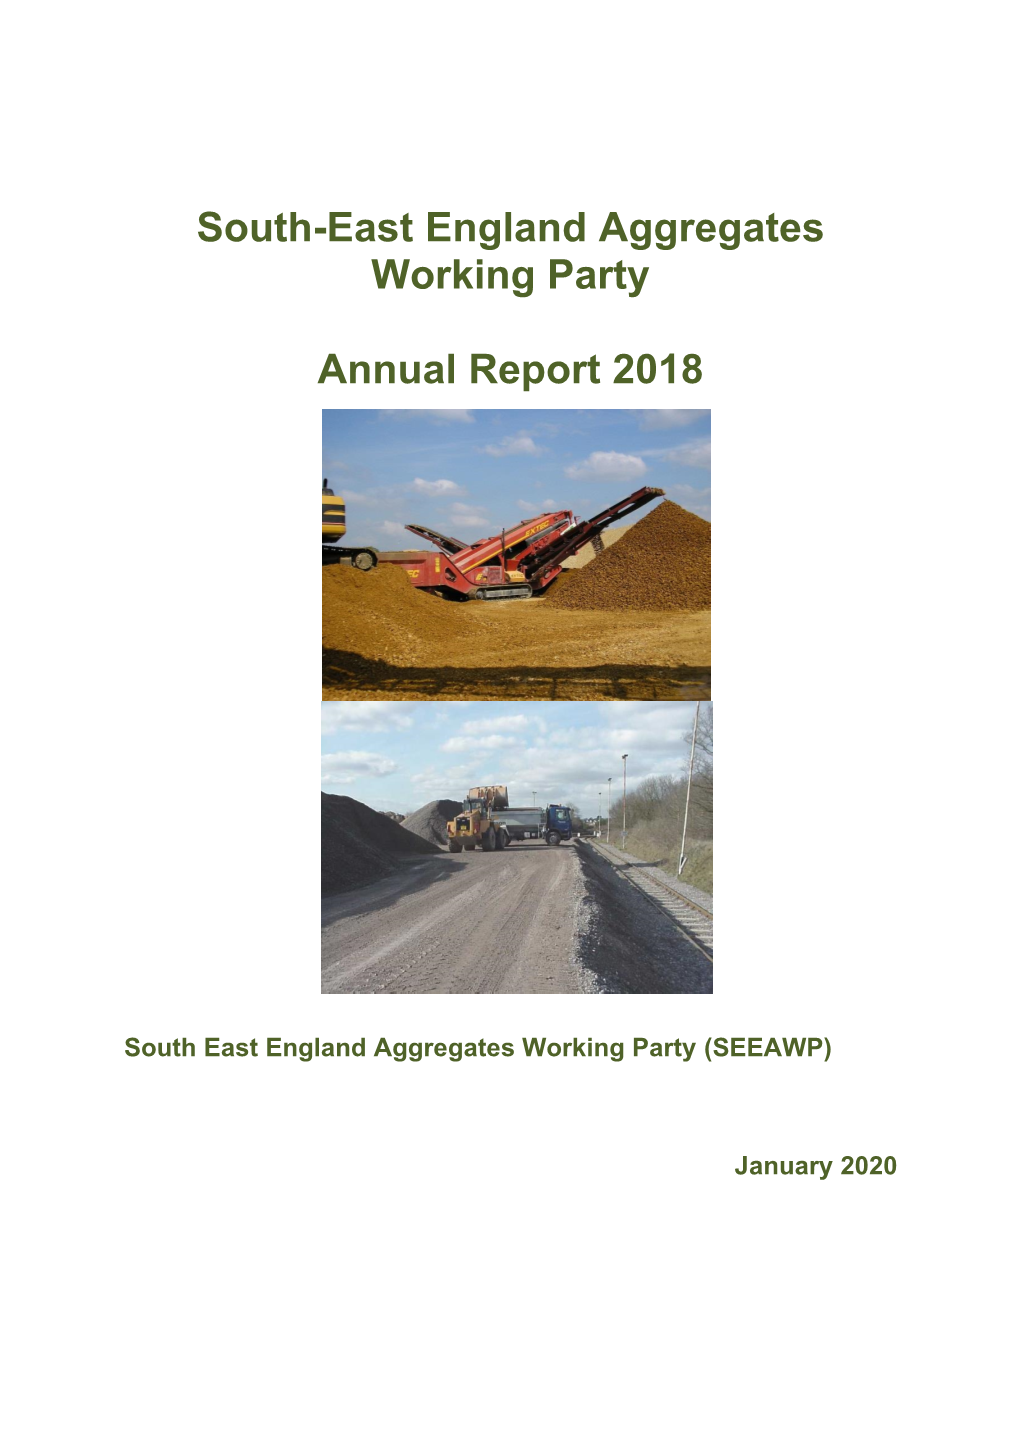 South-East England Aggregates Working Party Annual Report 2018